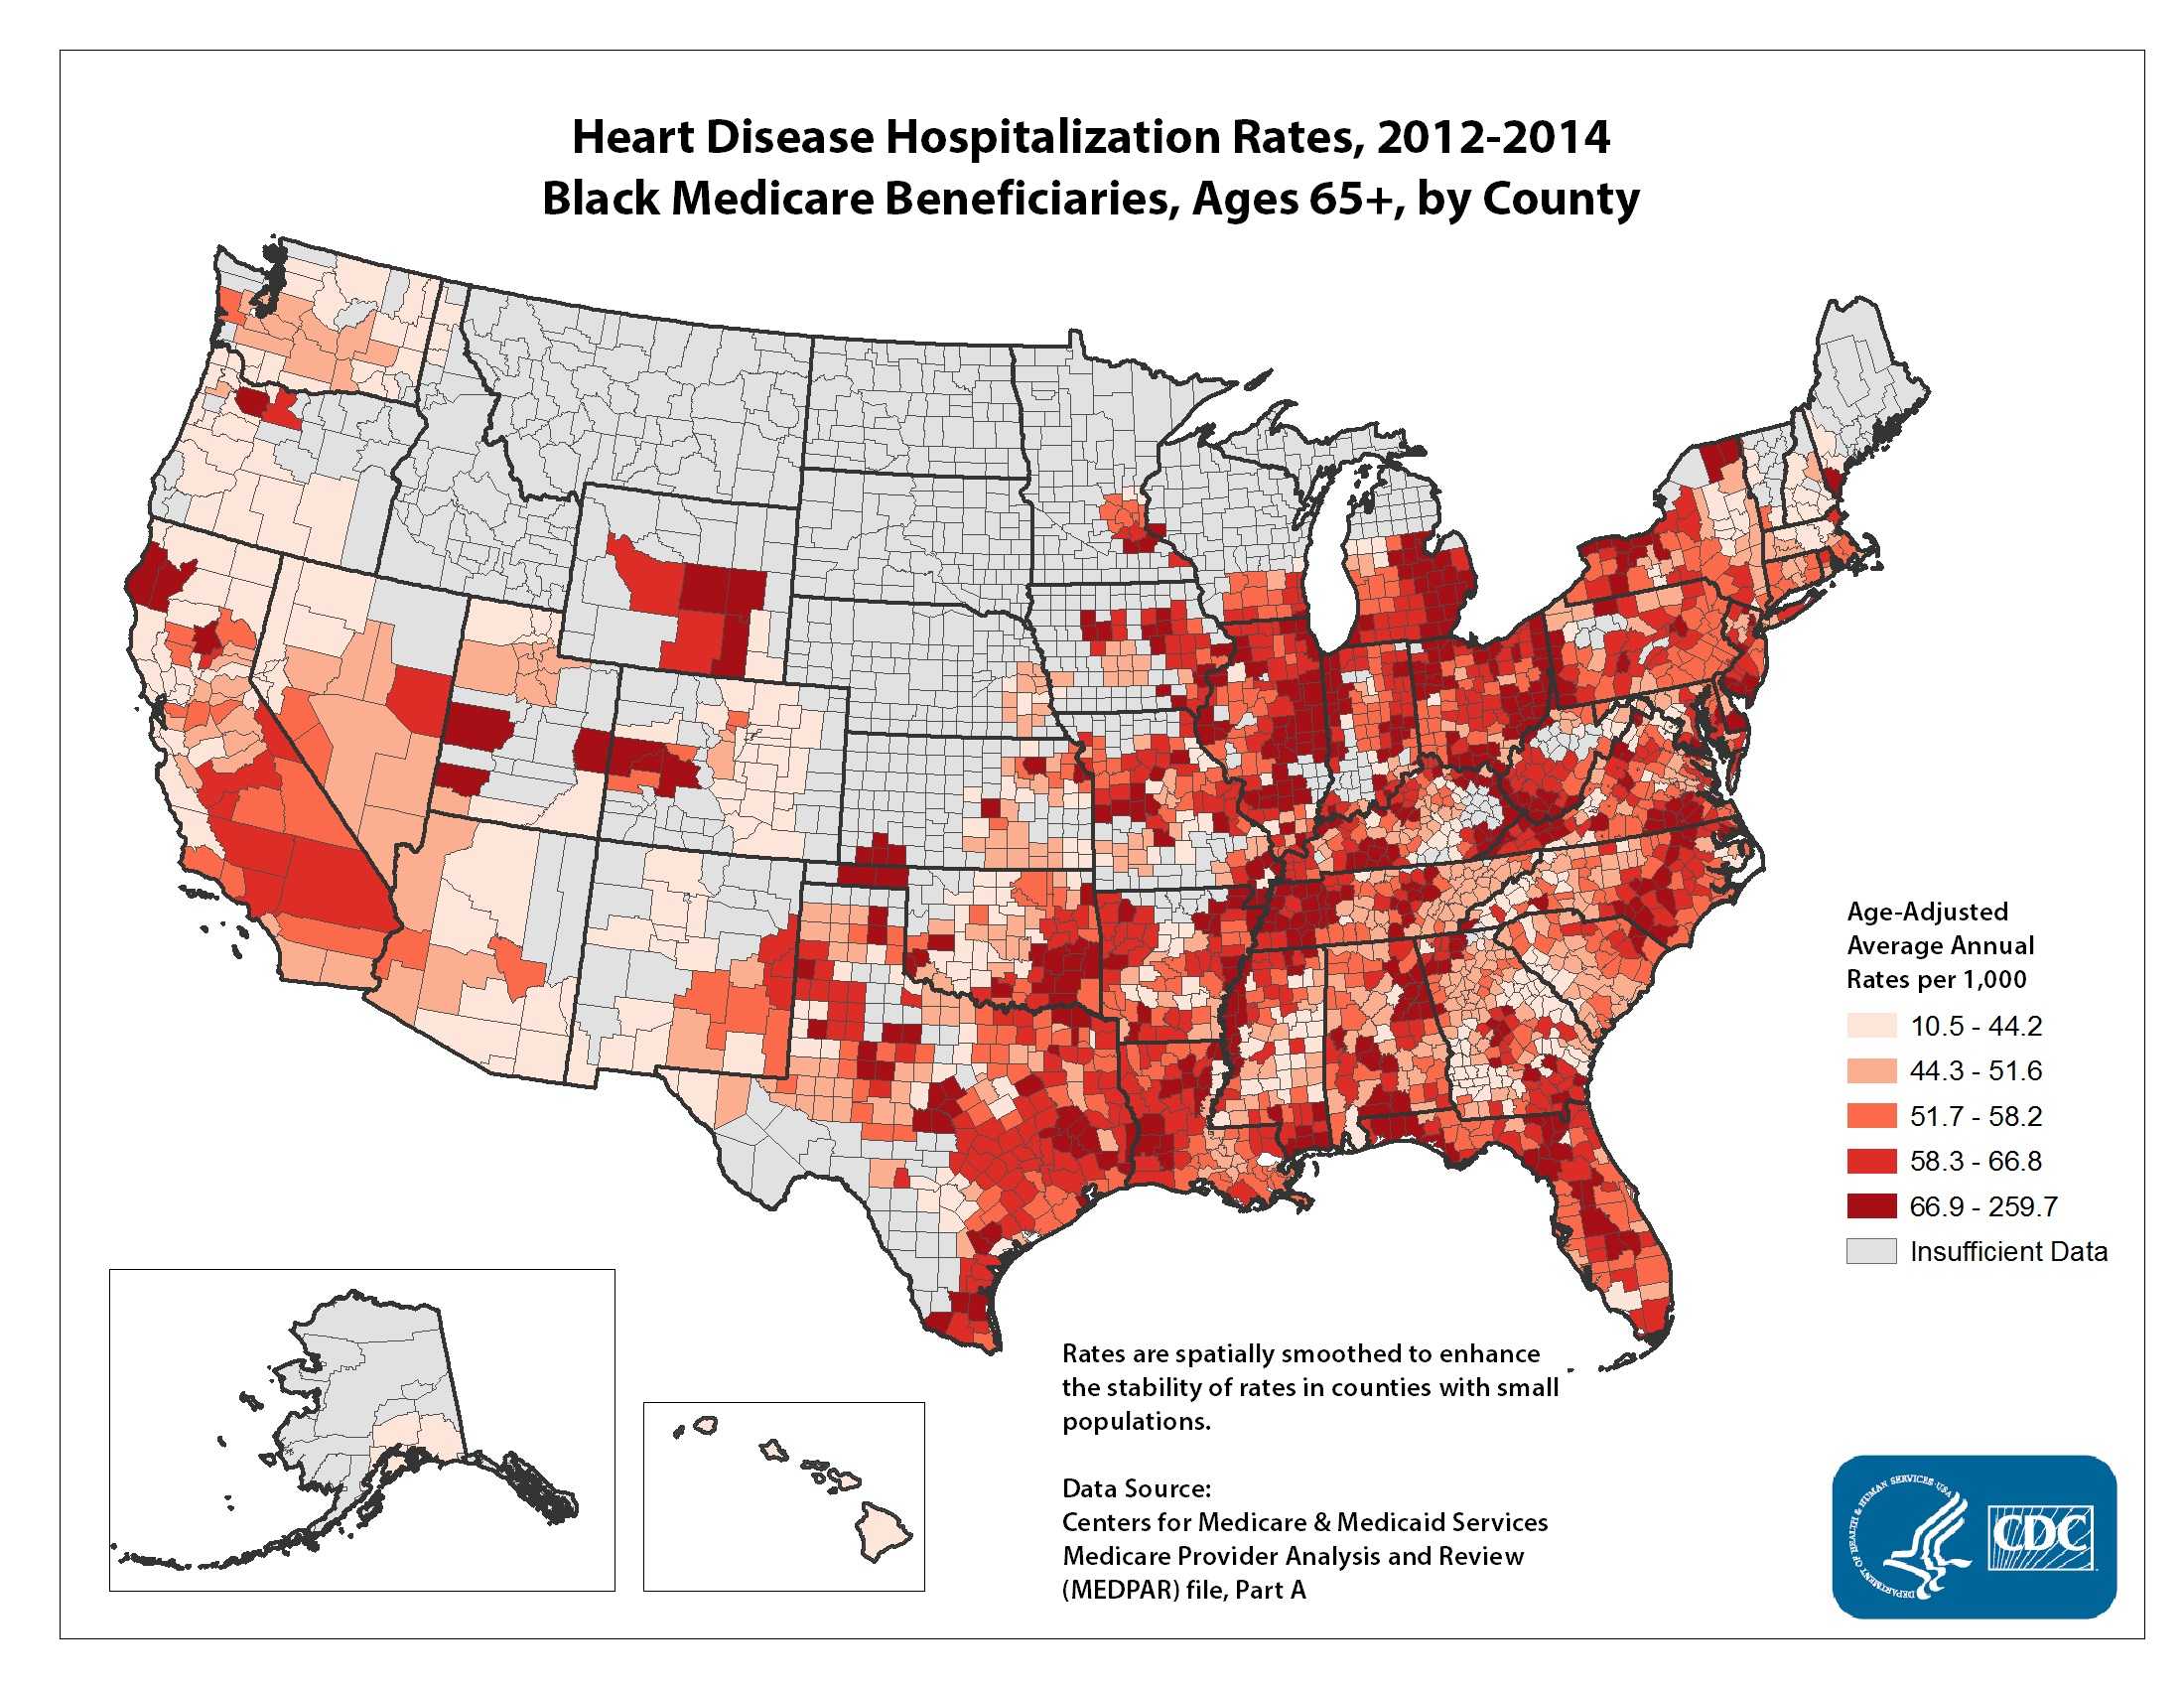 Heart Disease Hospitalization Rates for 2010 through 2012 for Blacks Aged 65 Years and Older by County. The map shows that pockets of counties with high heart disease hospitalization rates – meaning the top quintile - are located in Texas, Colorado, Louisiana, Pennsylvania, Ohio, Michigan, Illinois, West Virginia, Kentucky, Tennessee, Alabama, North Carolina, Arkansas, and Missouri.